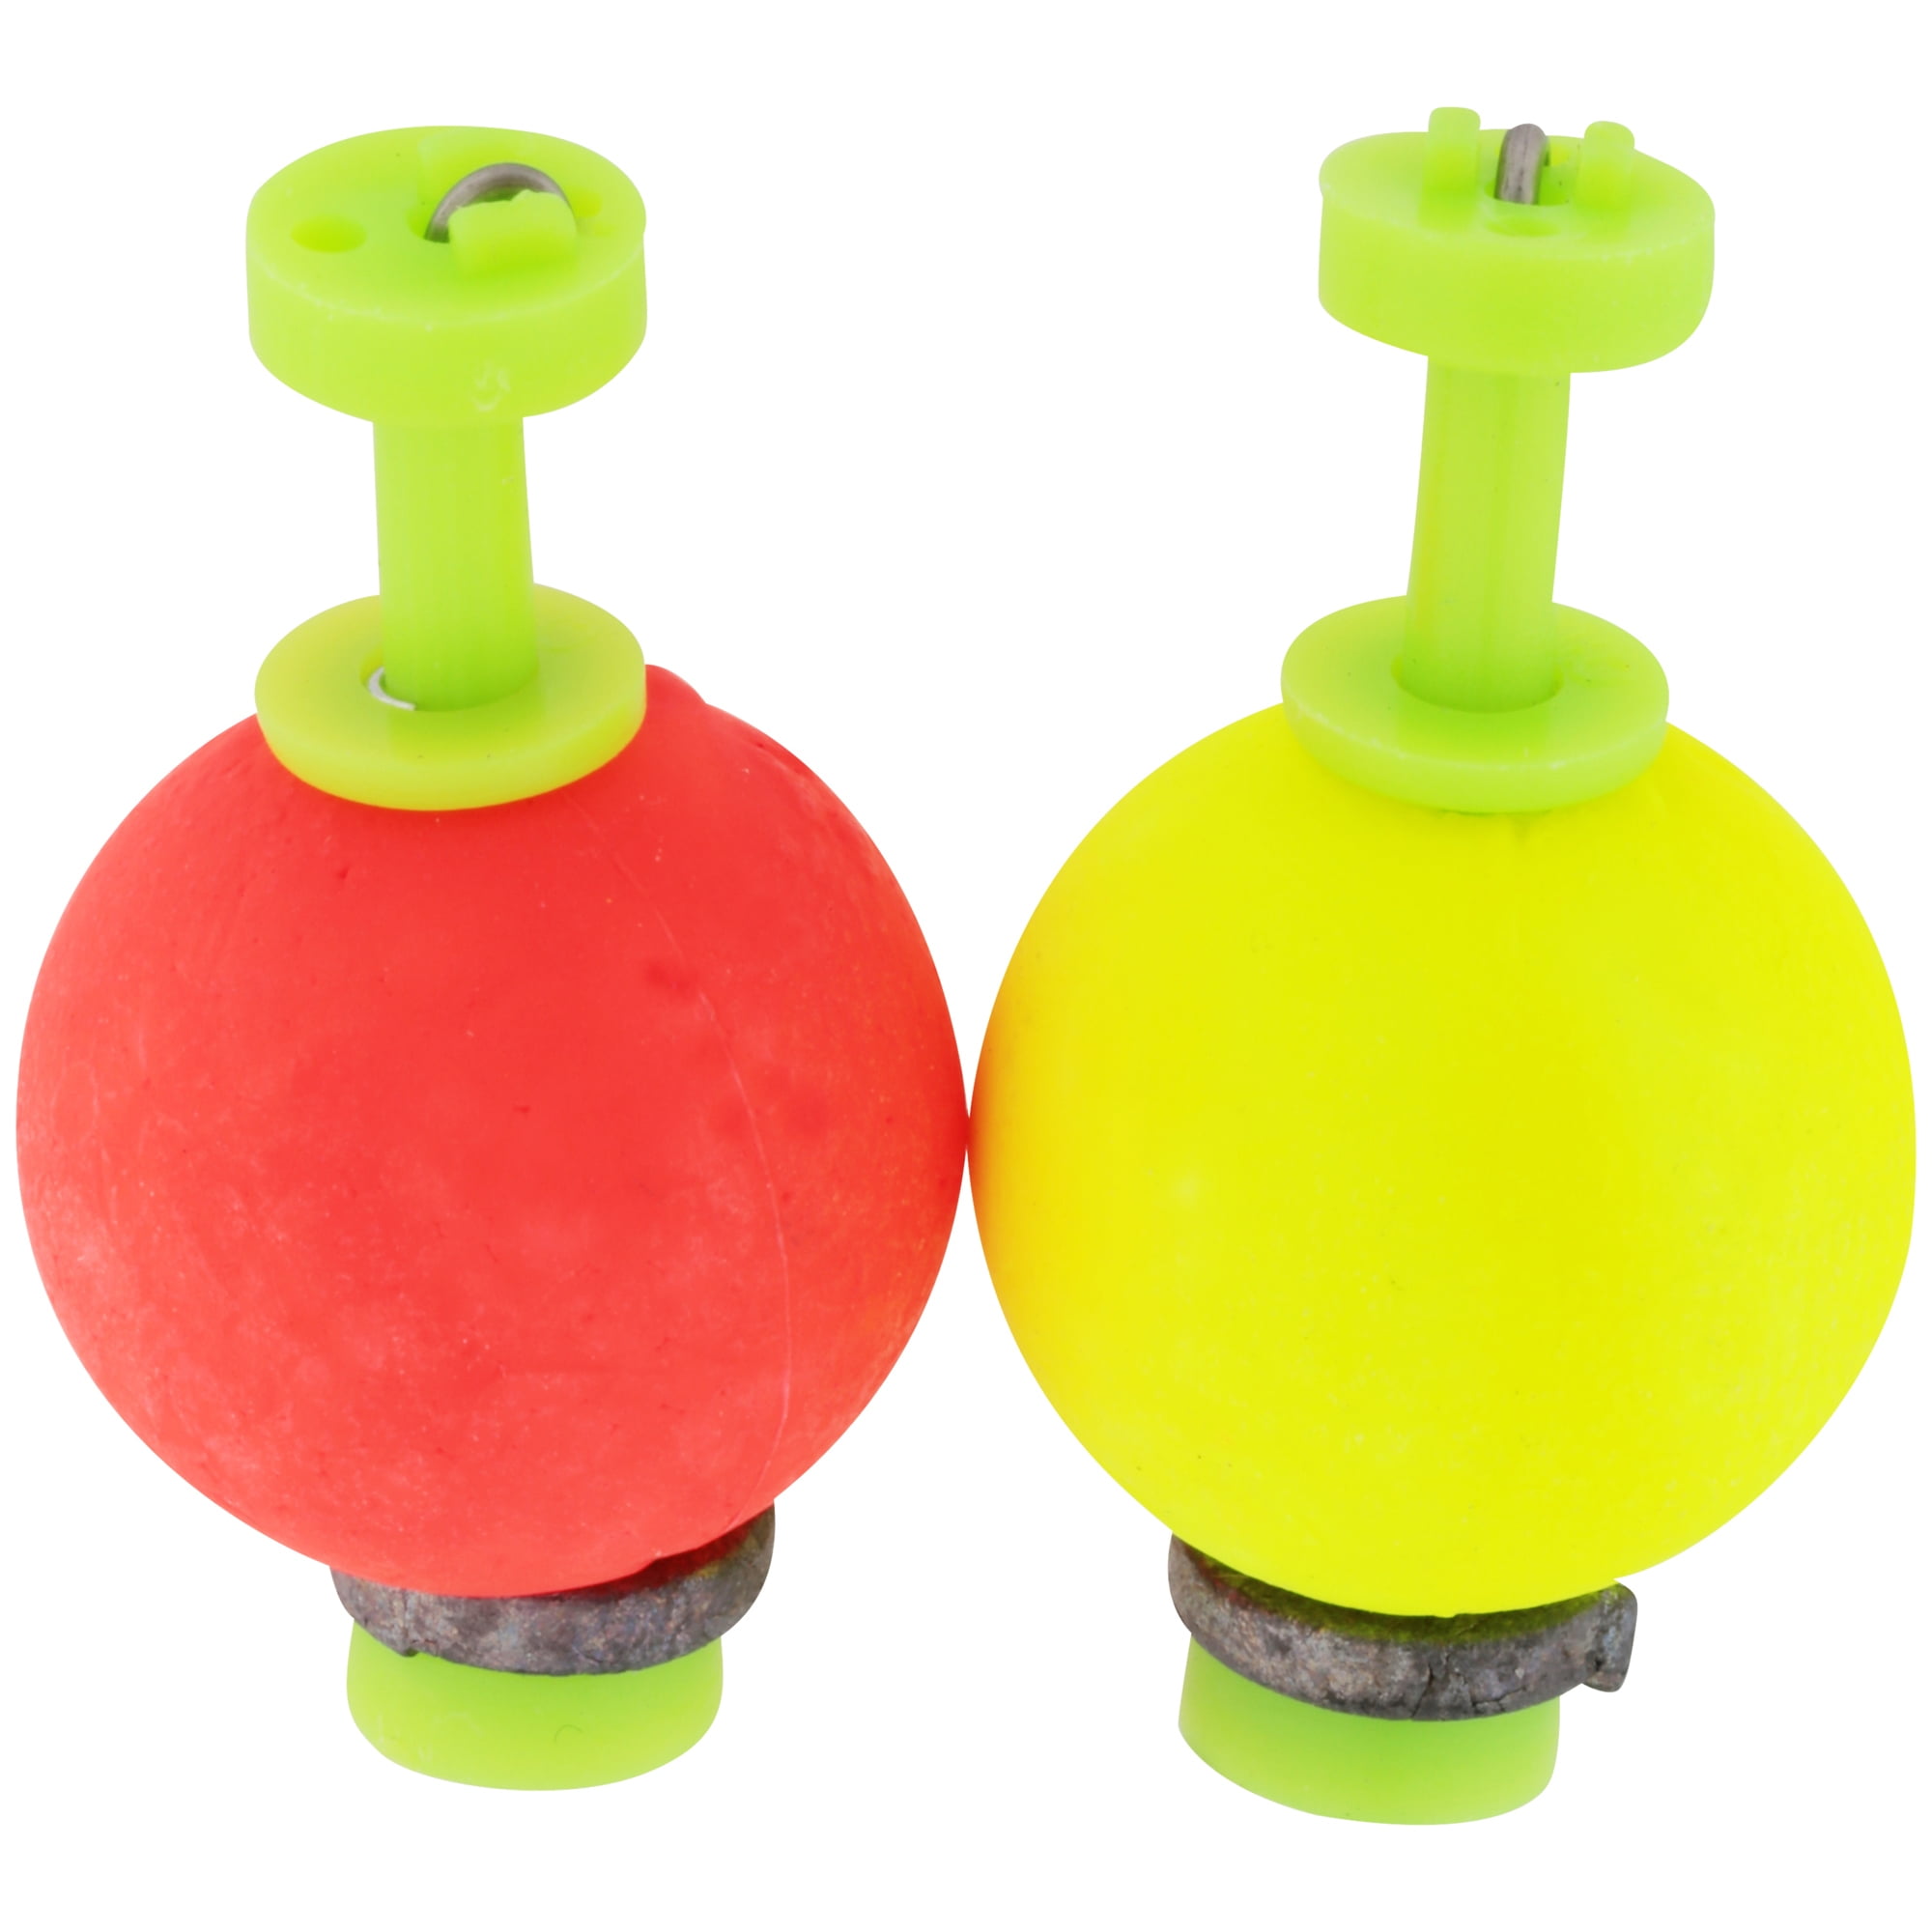 12 1 inch" FISHING BOBBERS Round Weighted Floats Flo Assorted Foam SNAP ON FLOAT 